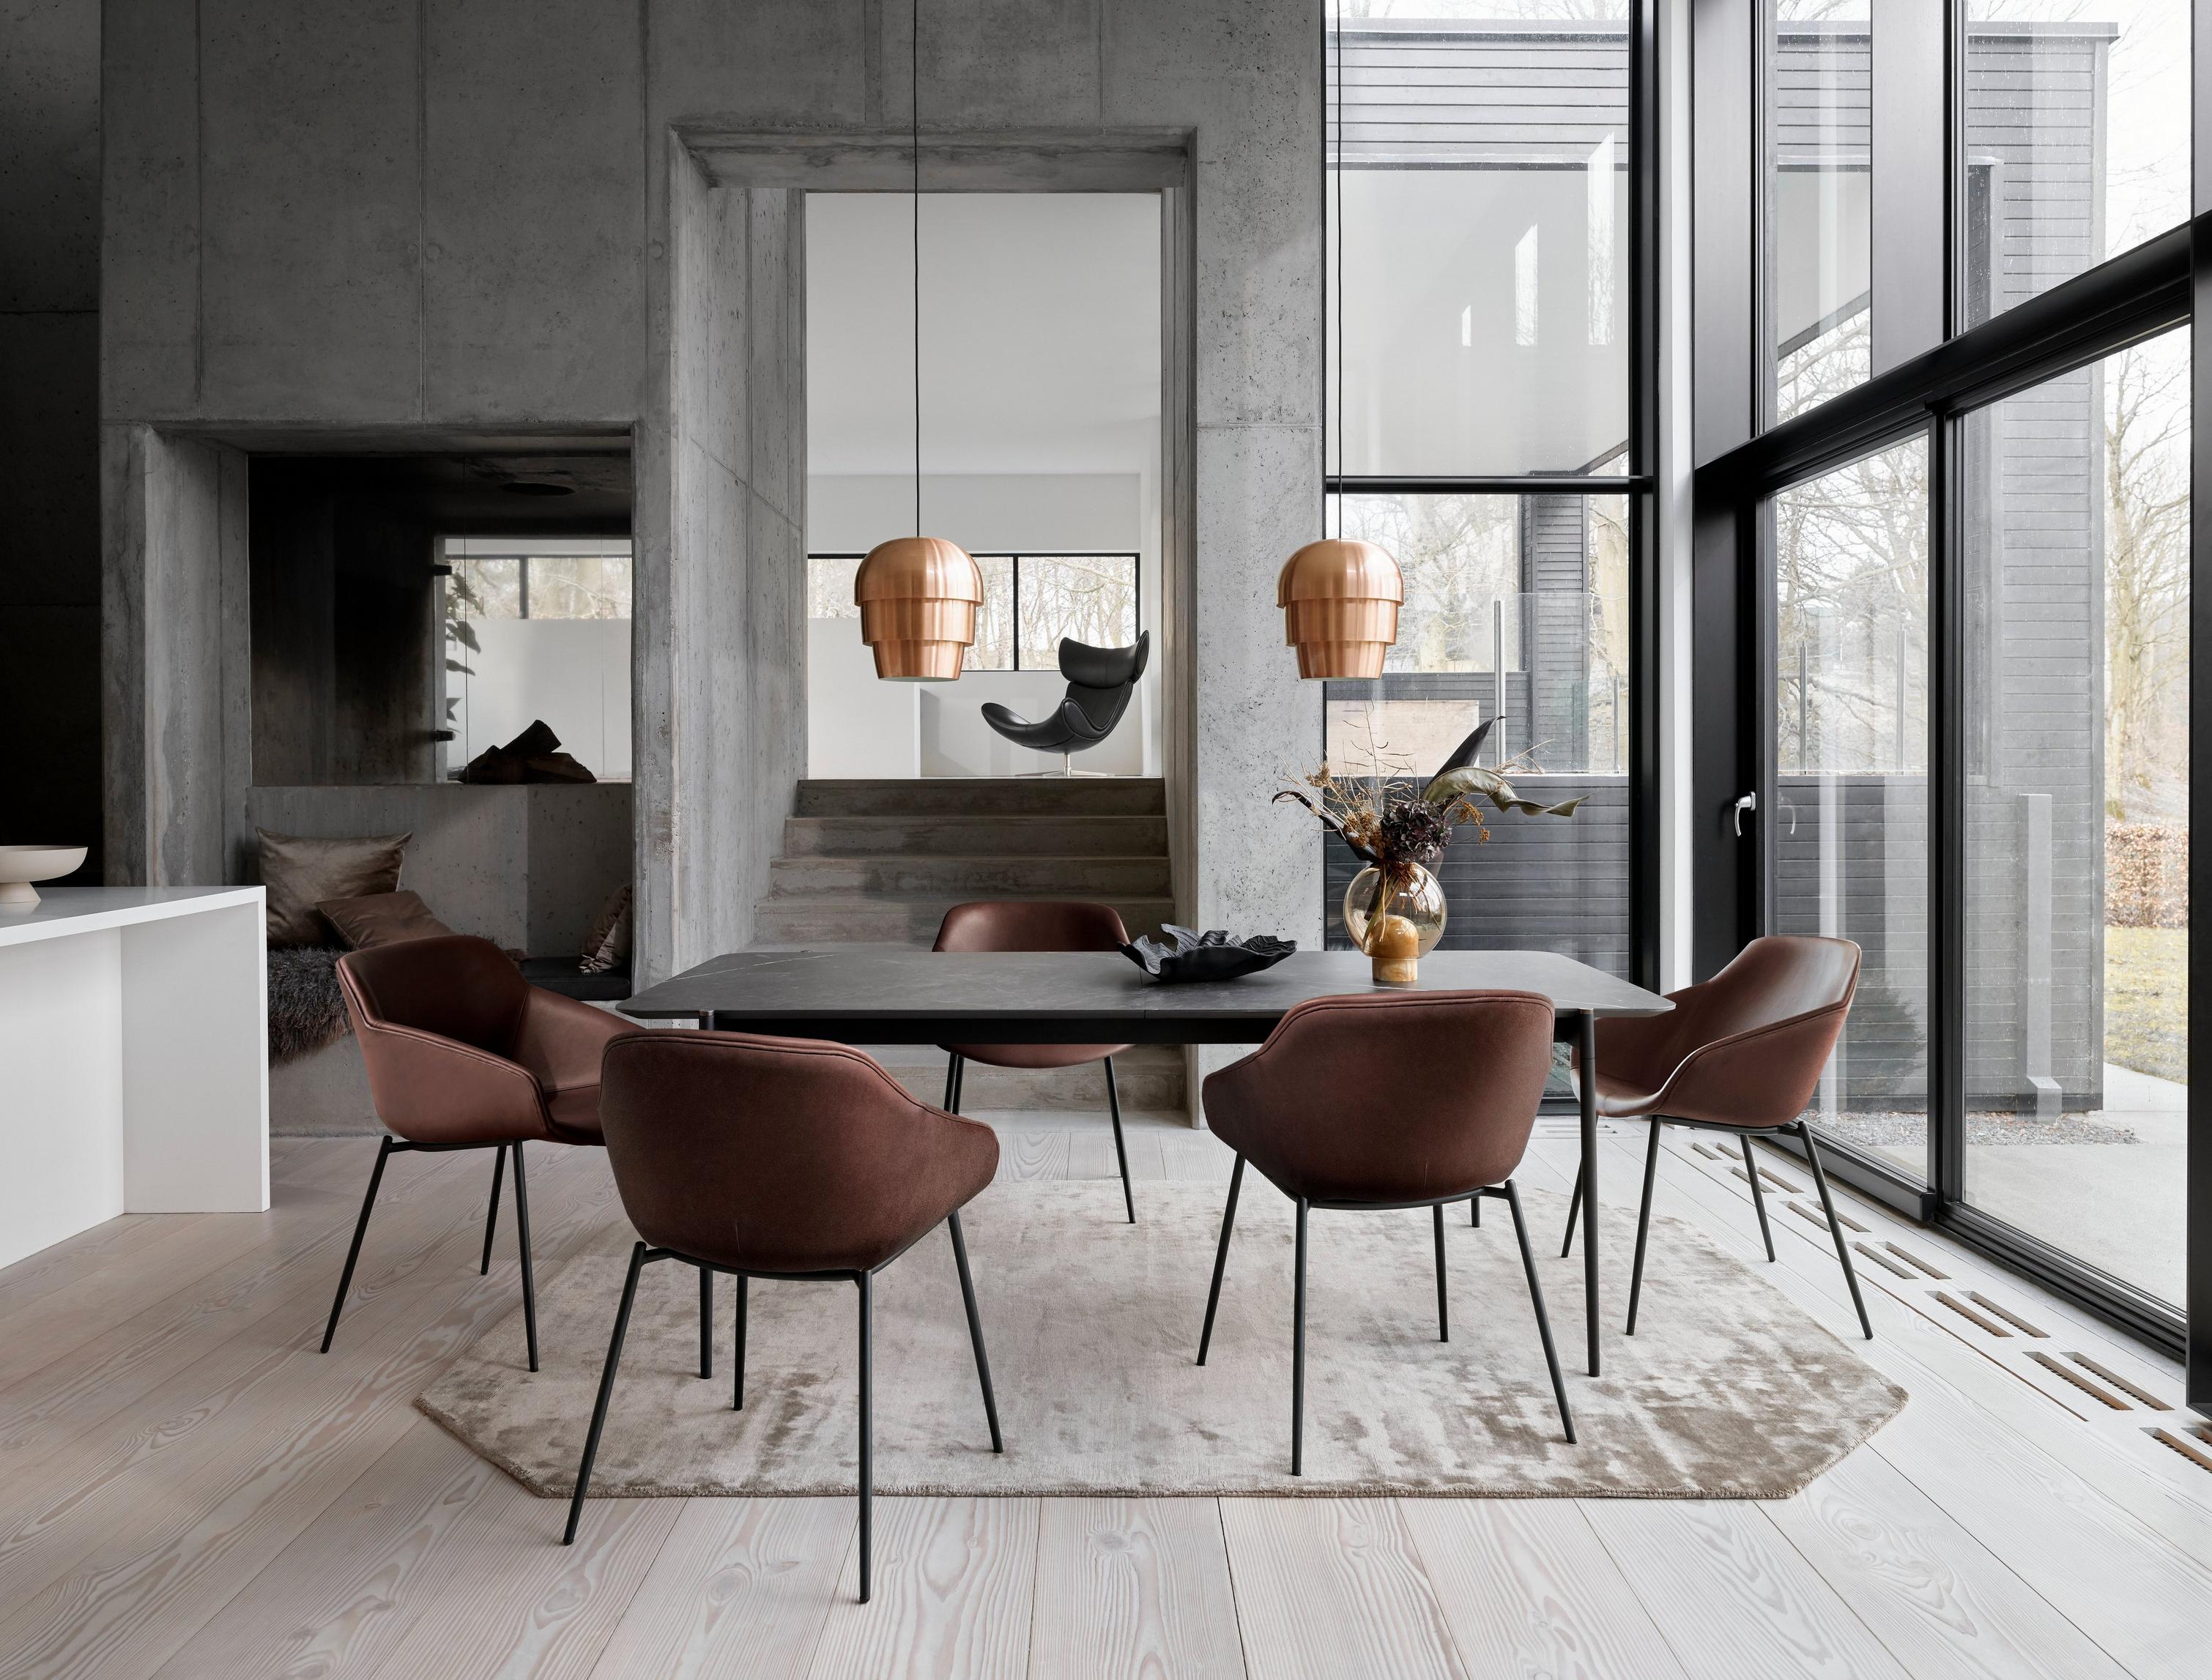 Industrial dining space with brown chairs, black table, copper lamps, and large windows with a garden view.